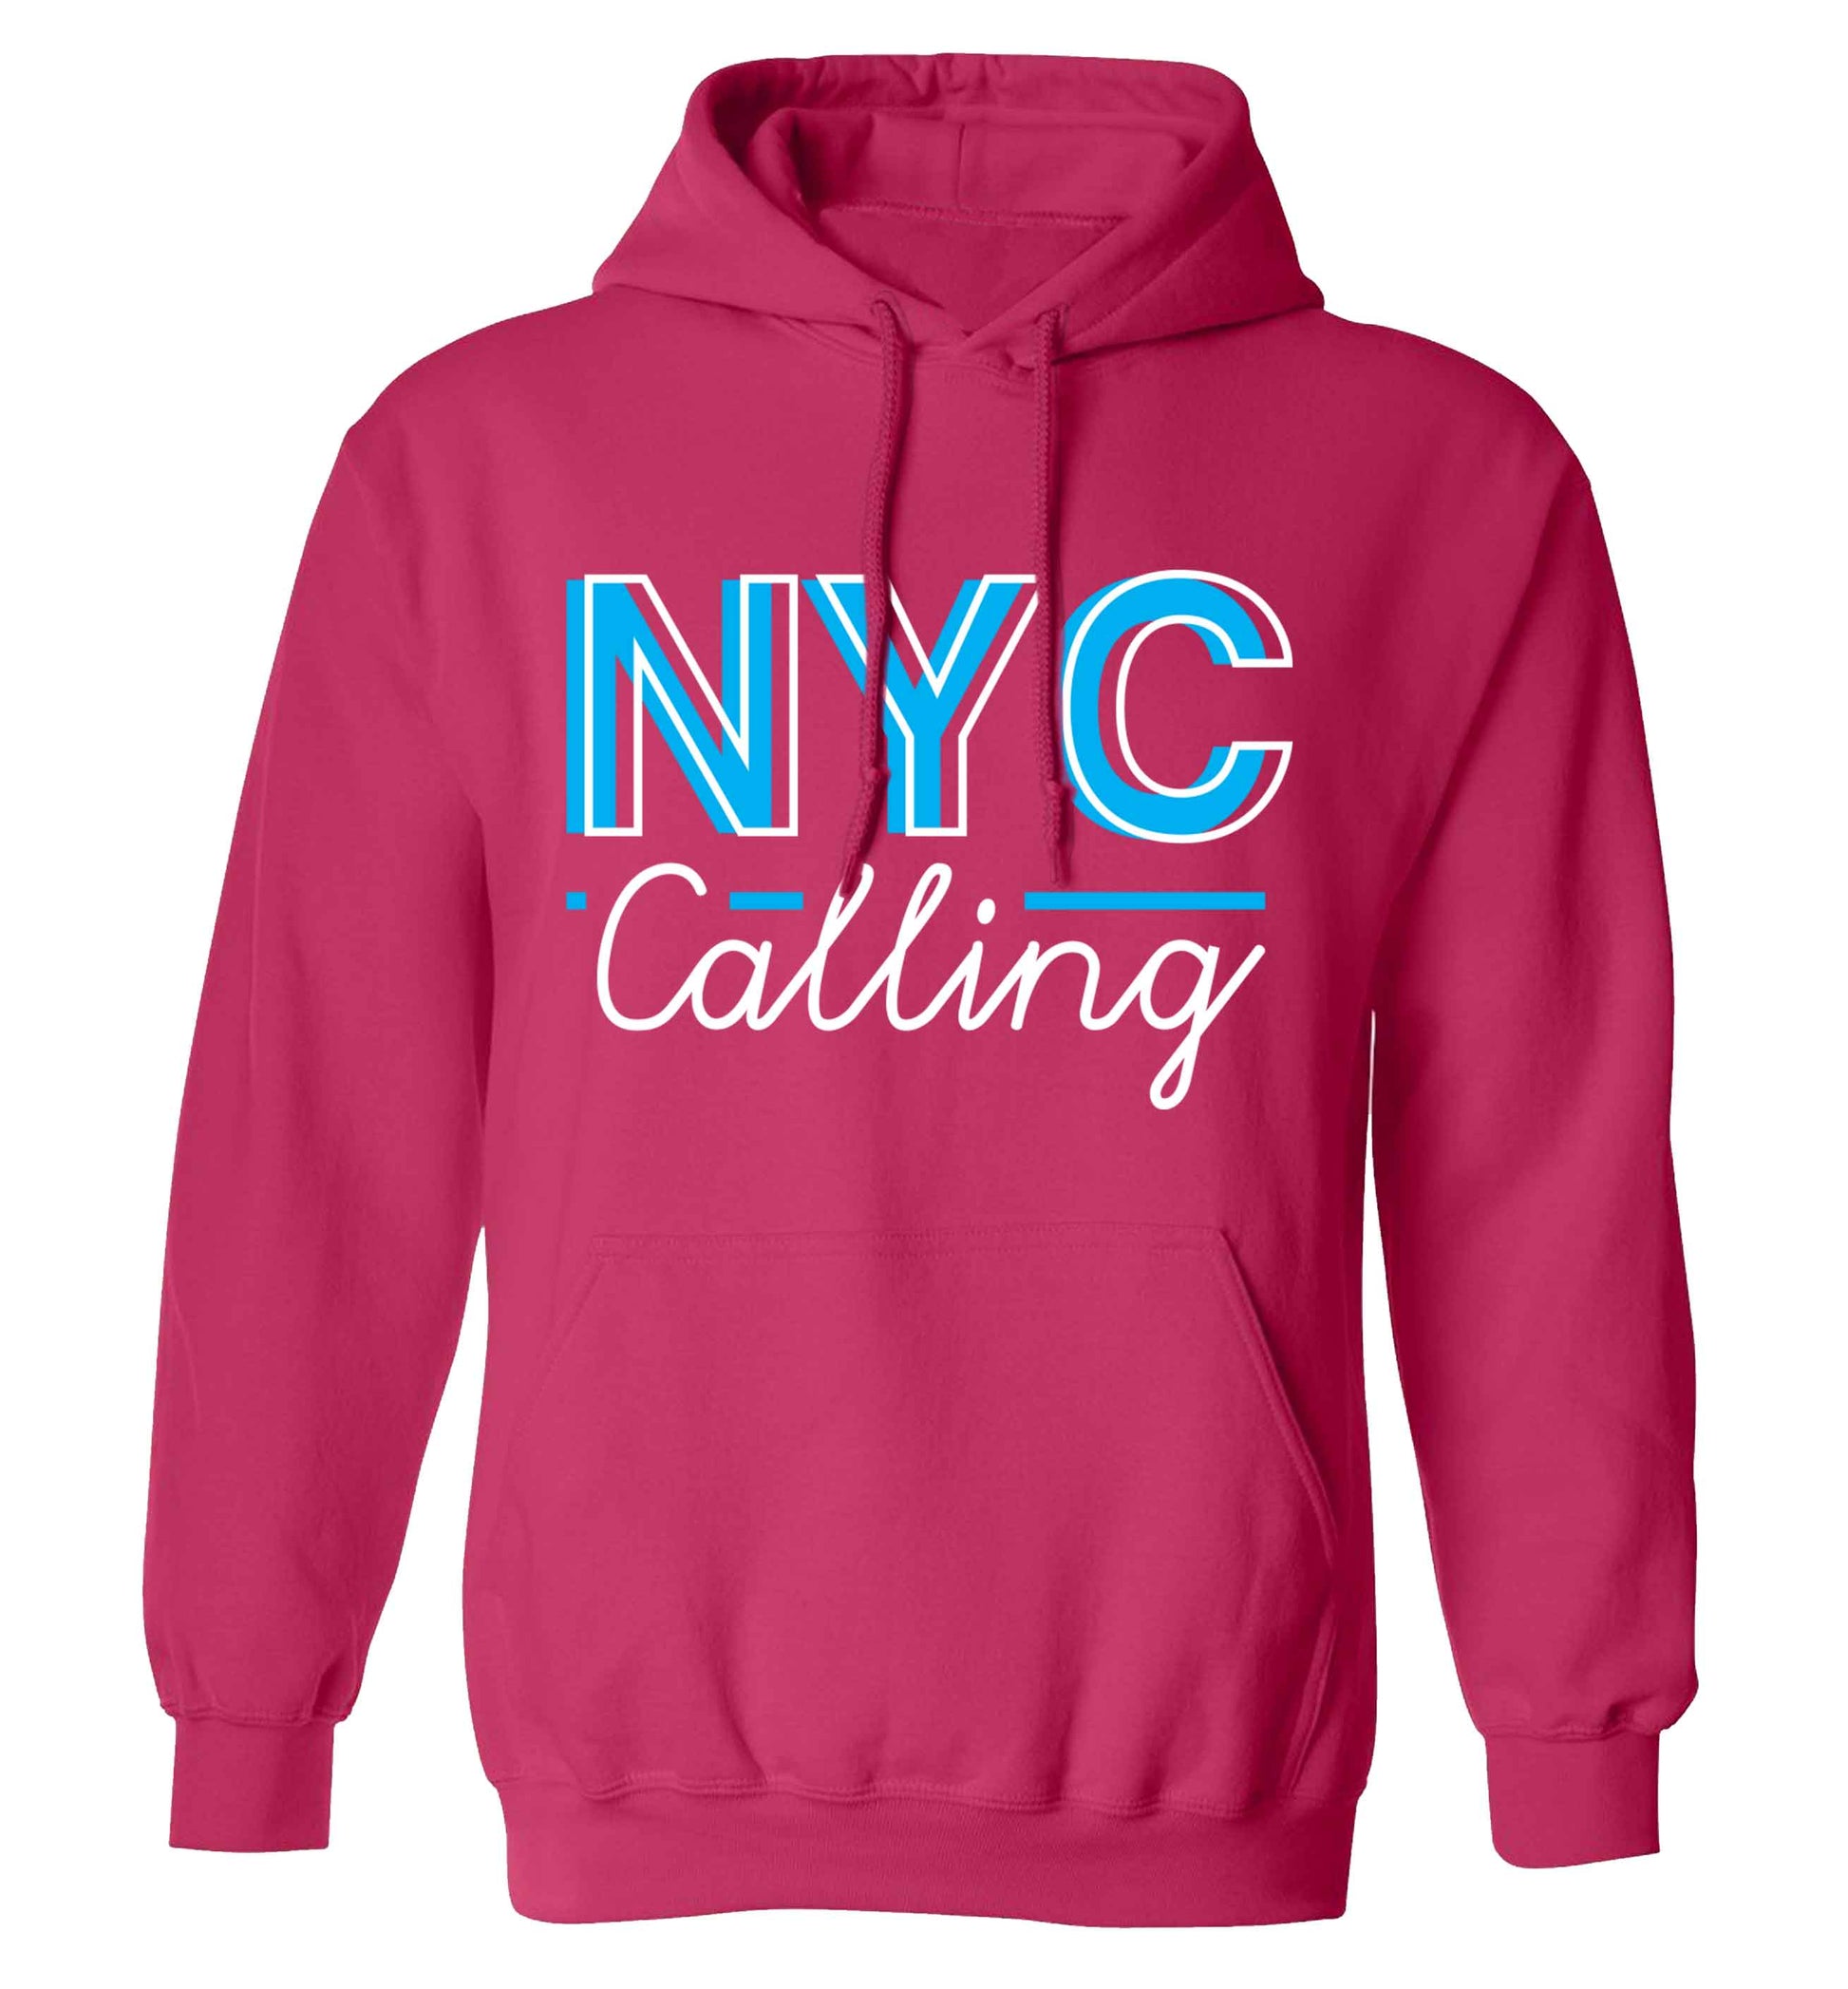 NYC calling adults unisex pink hoodie 2XL